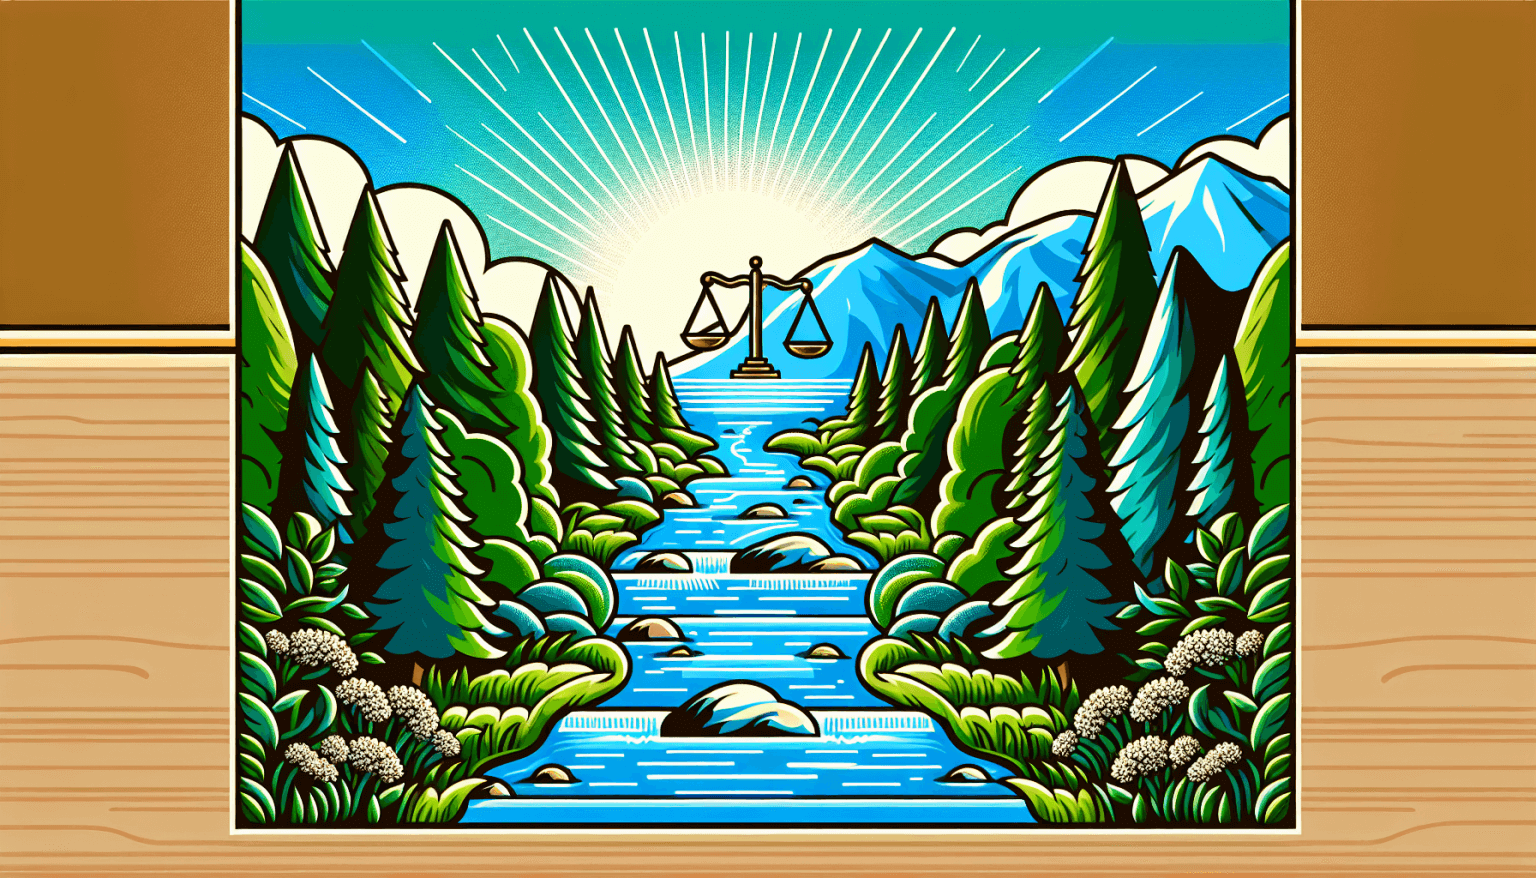 A serene painting of a flowing river with clear waters surrounded by verdant forests, symbolizing justice and righteousness, under a luminous sky.